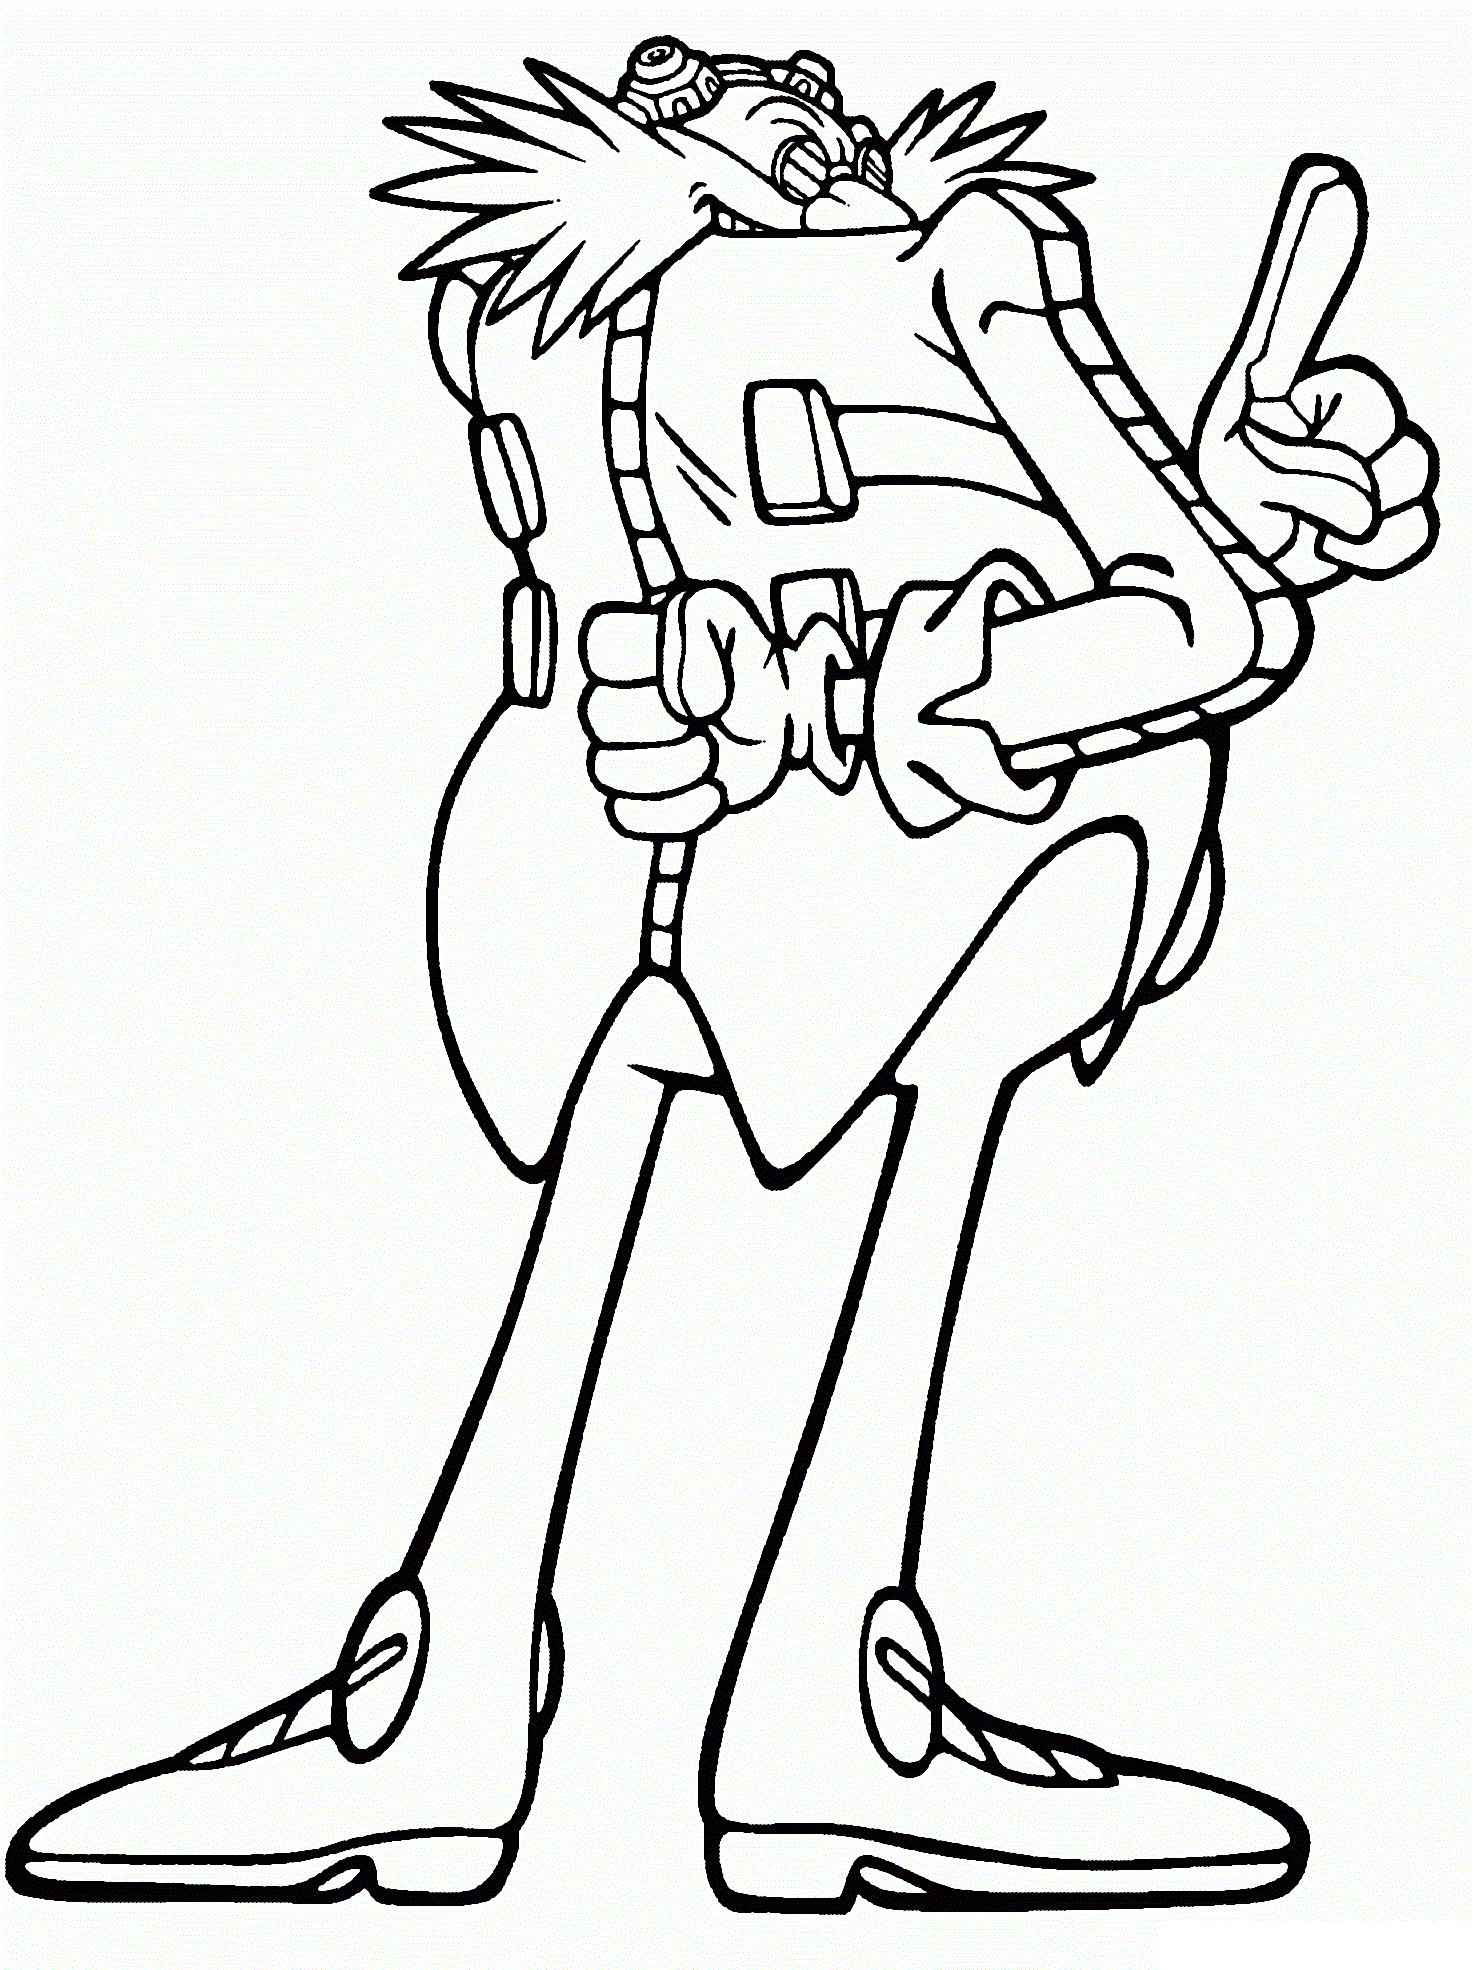 Doctor Eggman Coloring Page